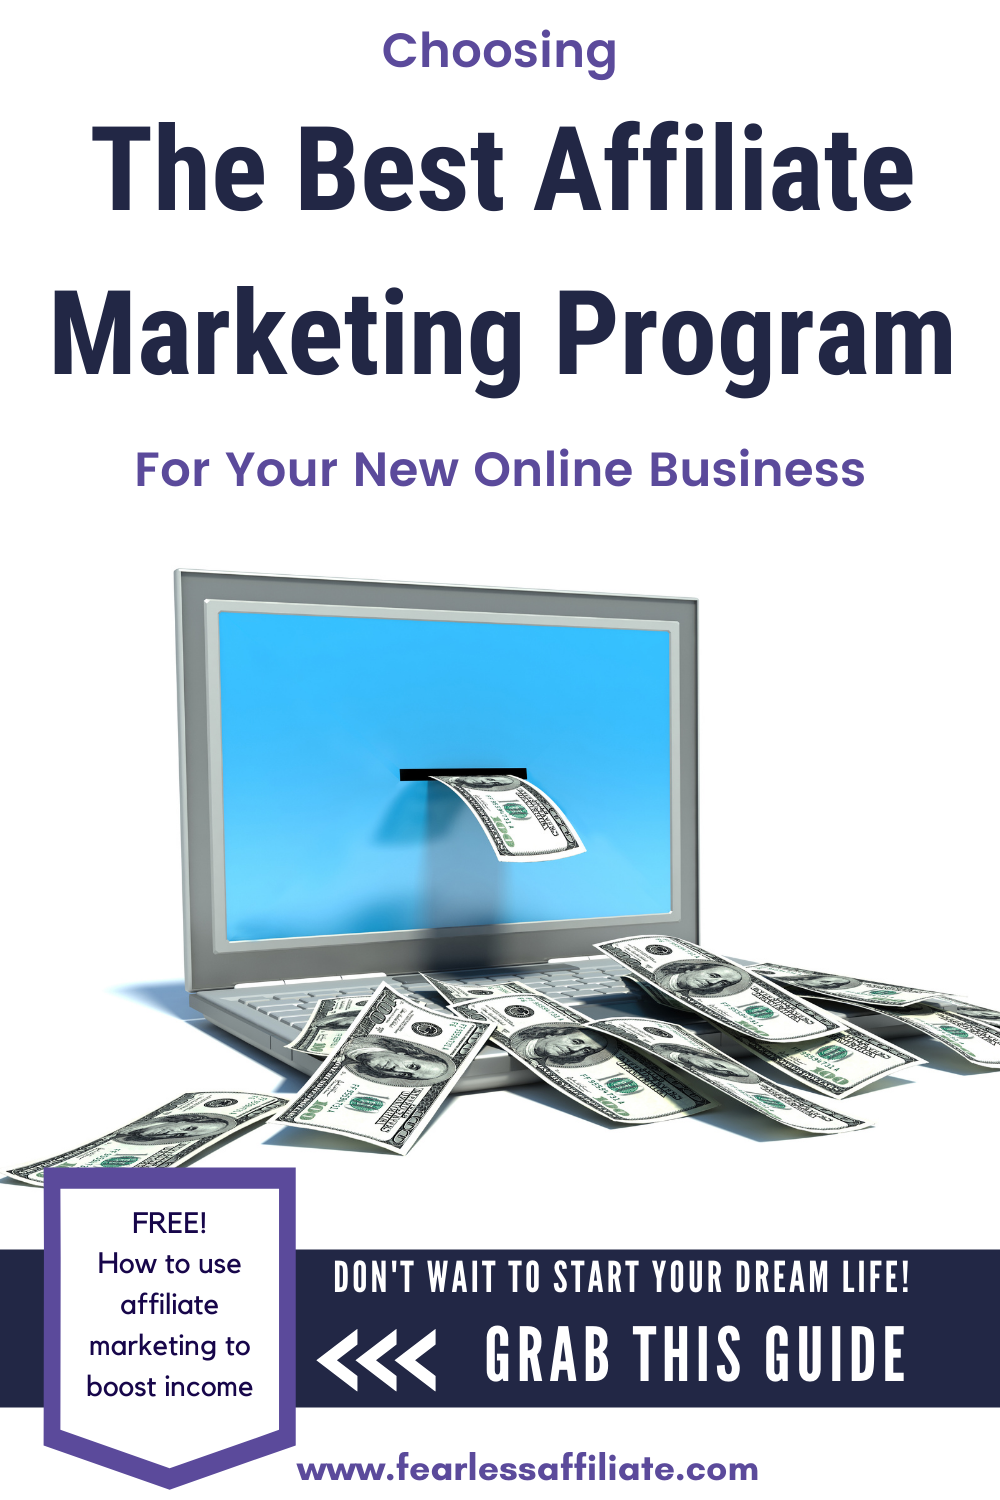 How To Choose The Best Affiliate Marketing Program